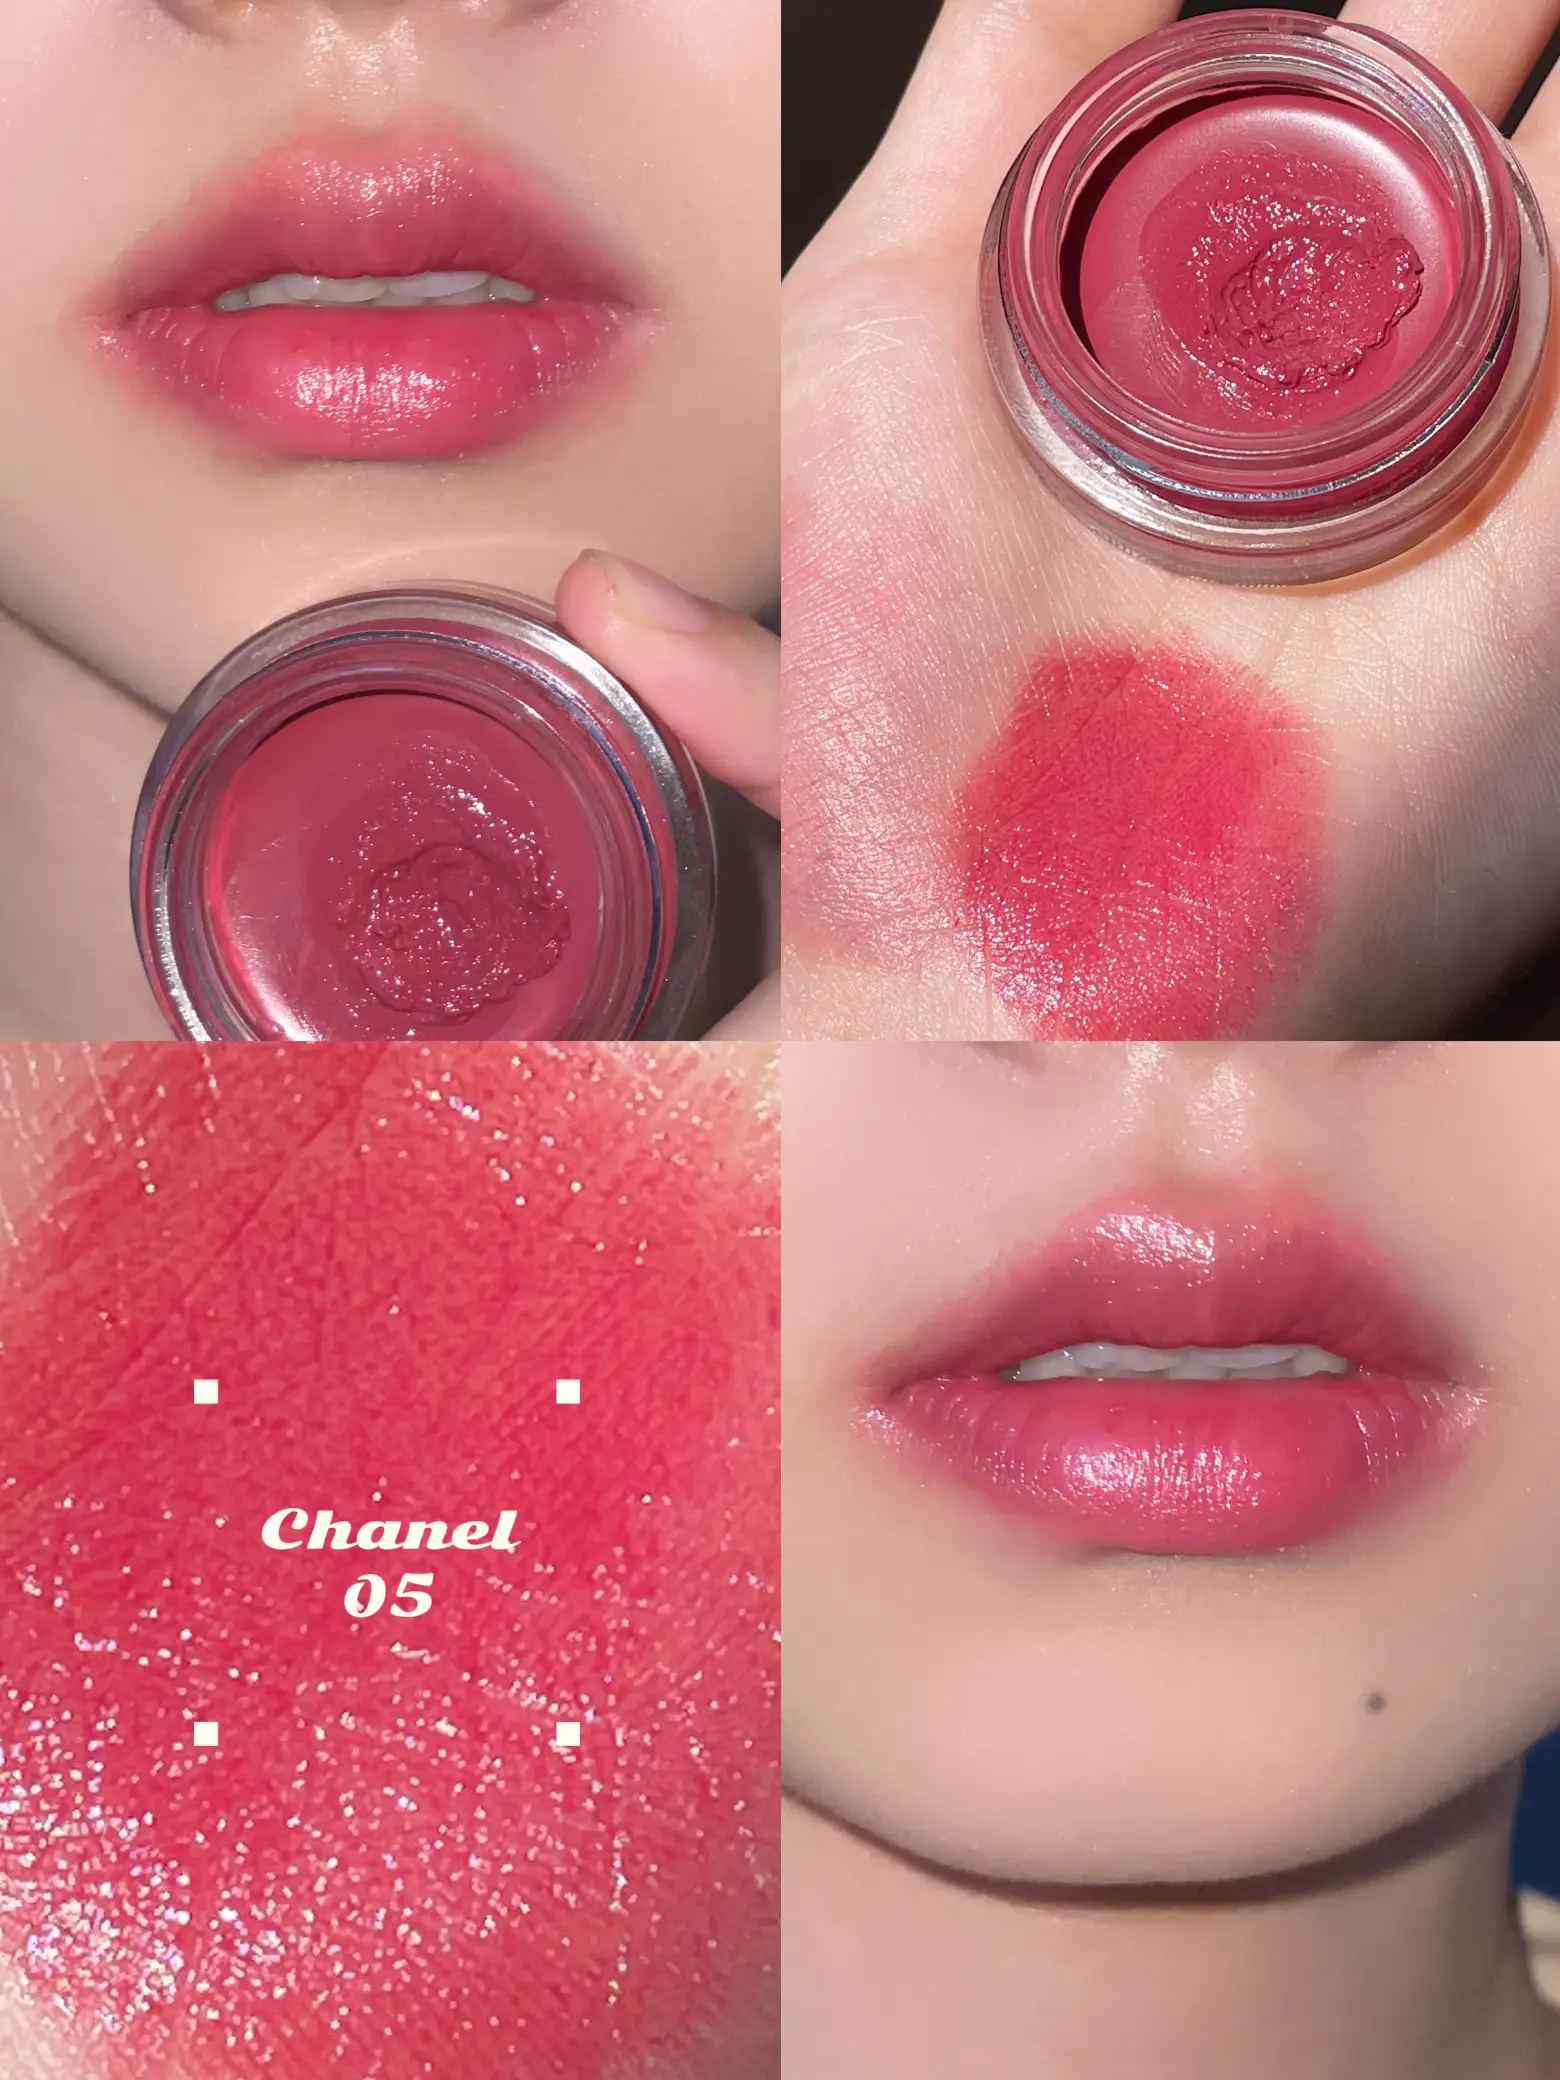 ✨N°1 DE CHANEL LIP AND CHEEK BALM 05, Gallery posted by BBGiona